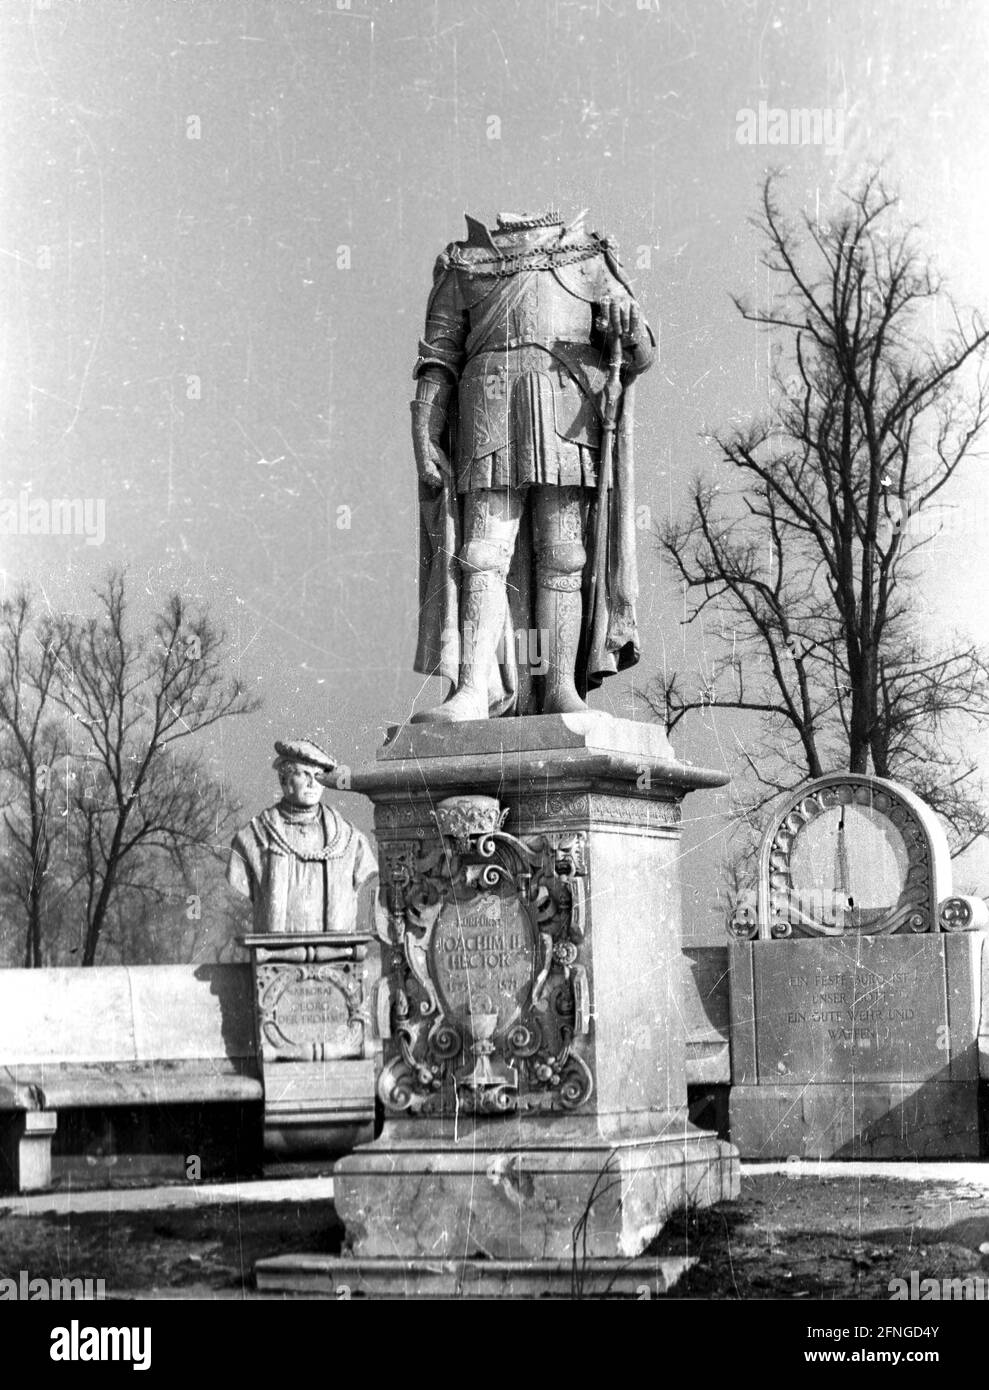 City views Berlin November 1946 / 12.11.1946 (date estimated) Monument of Joachim II Hector ( Elector of Brandenburg ) with severed head [automated translation] Stock Photo